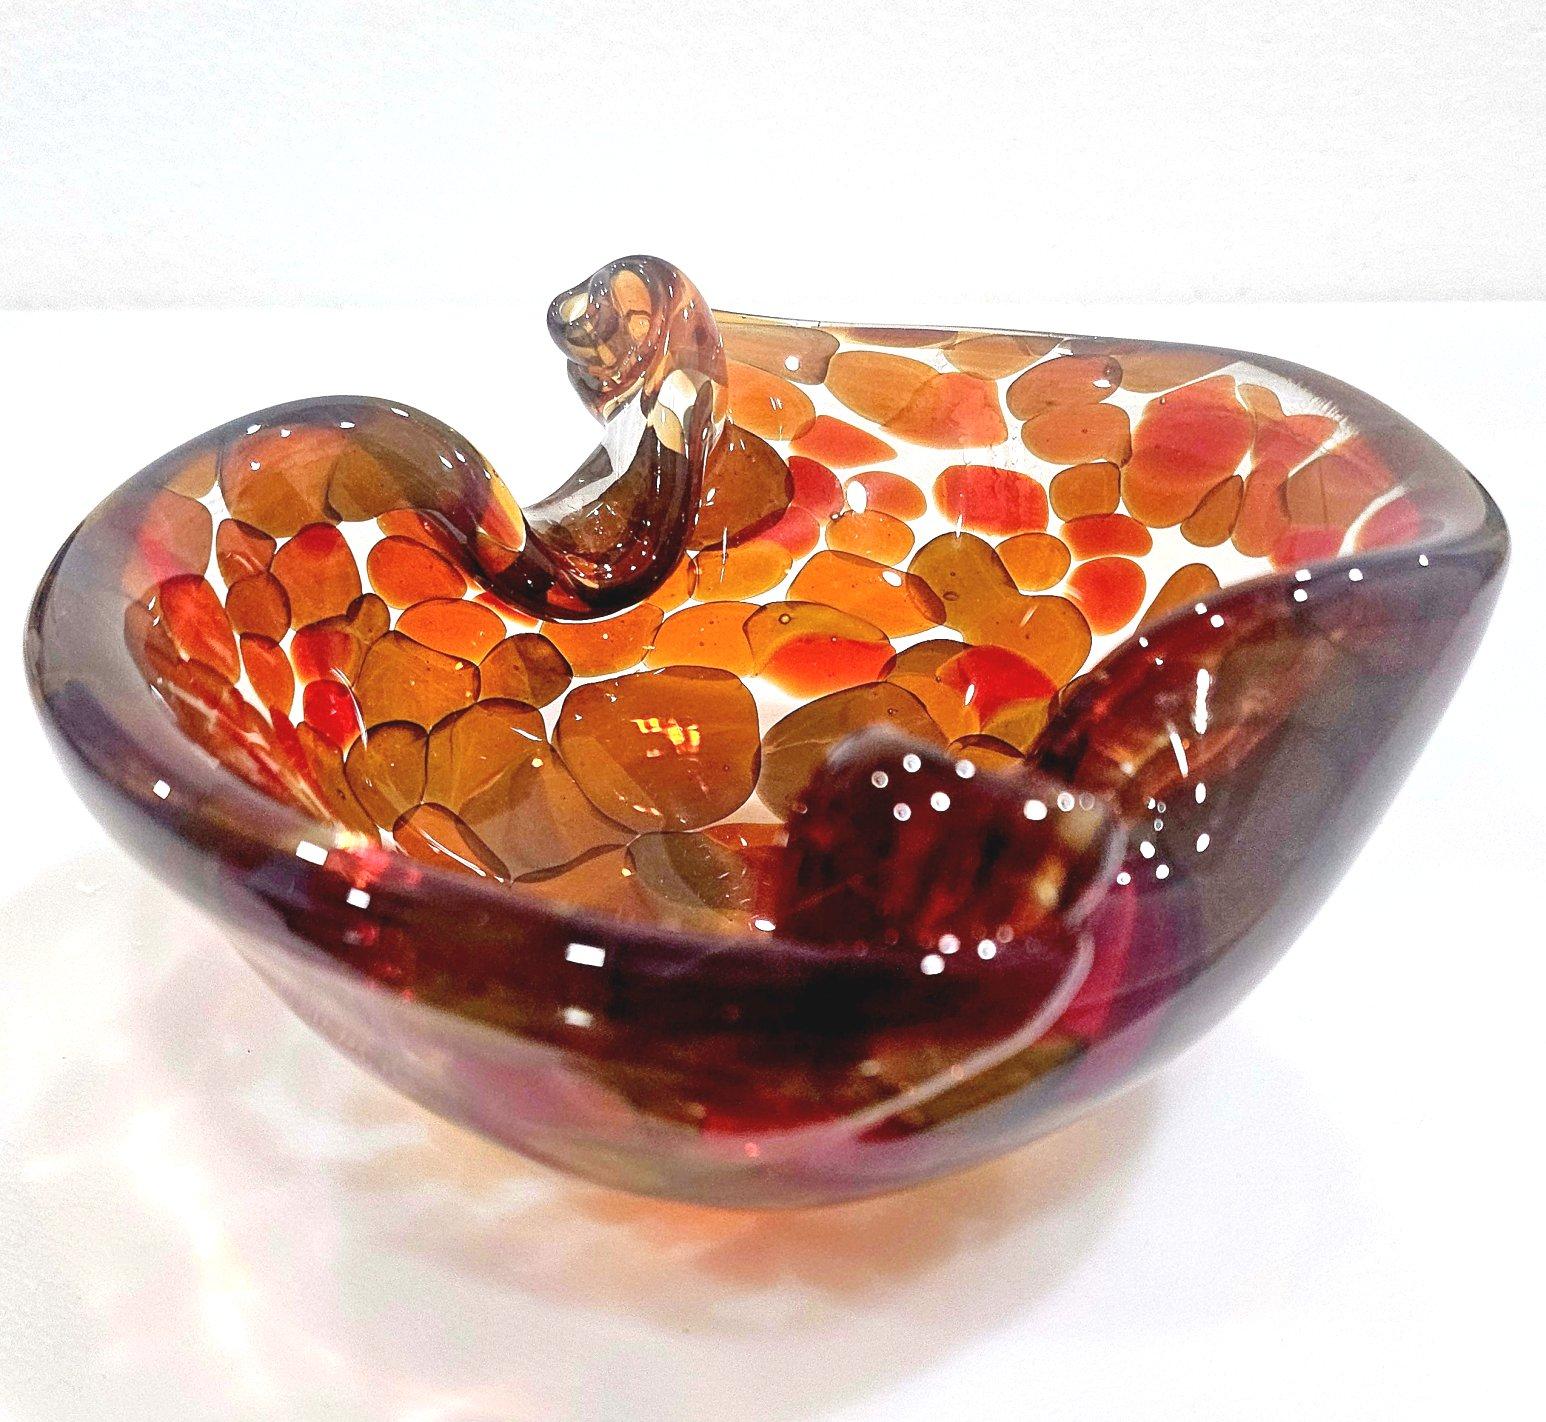 Vintage Murano Glass a Pentoni (spots) Bowl, Shell Motif
Measures: approximately 6 x 5 x 2.25  inches.
The 'a pentoni' spots appearing in earthy jewel tones, depending on environment and lighting, make this piece really special.  This is one of our